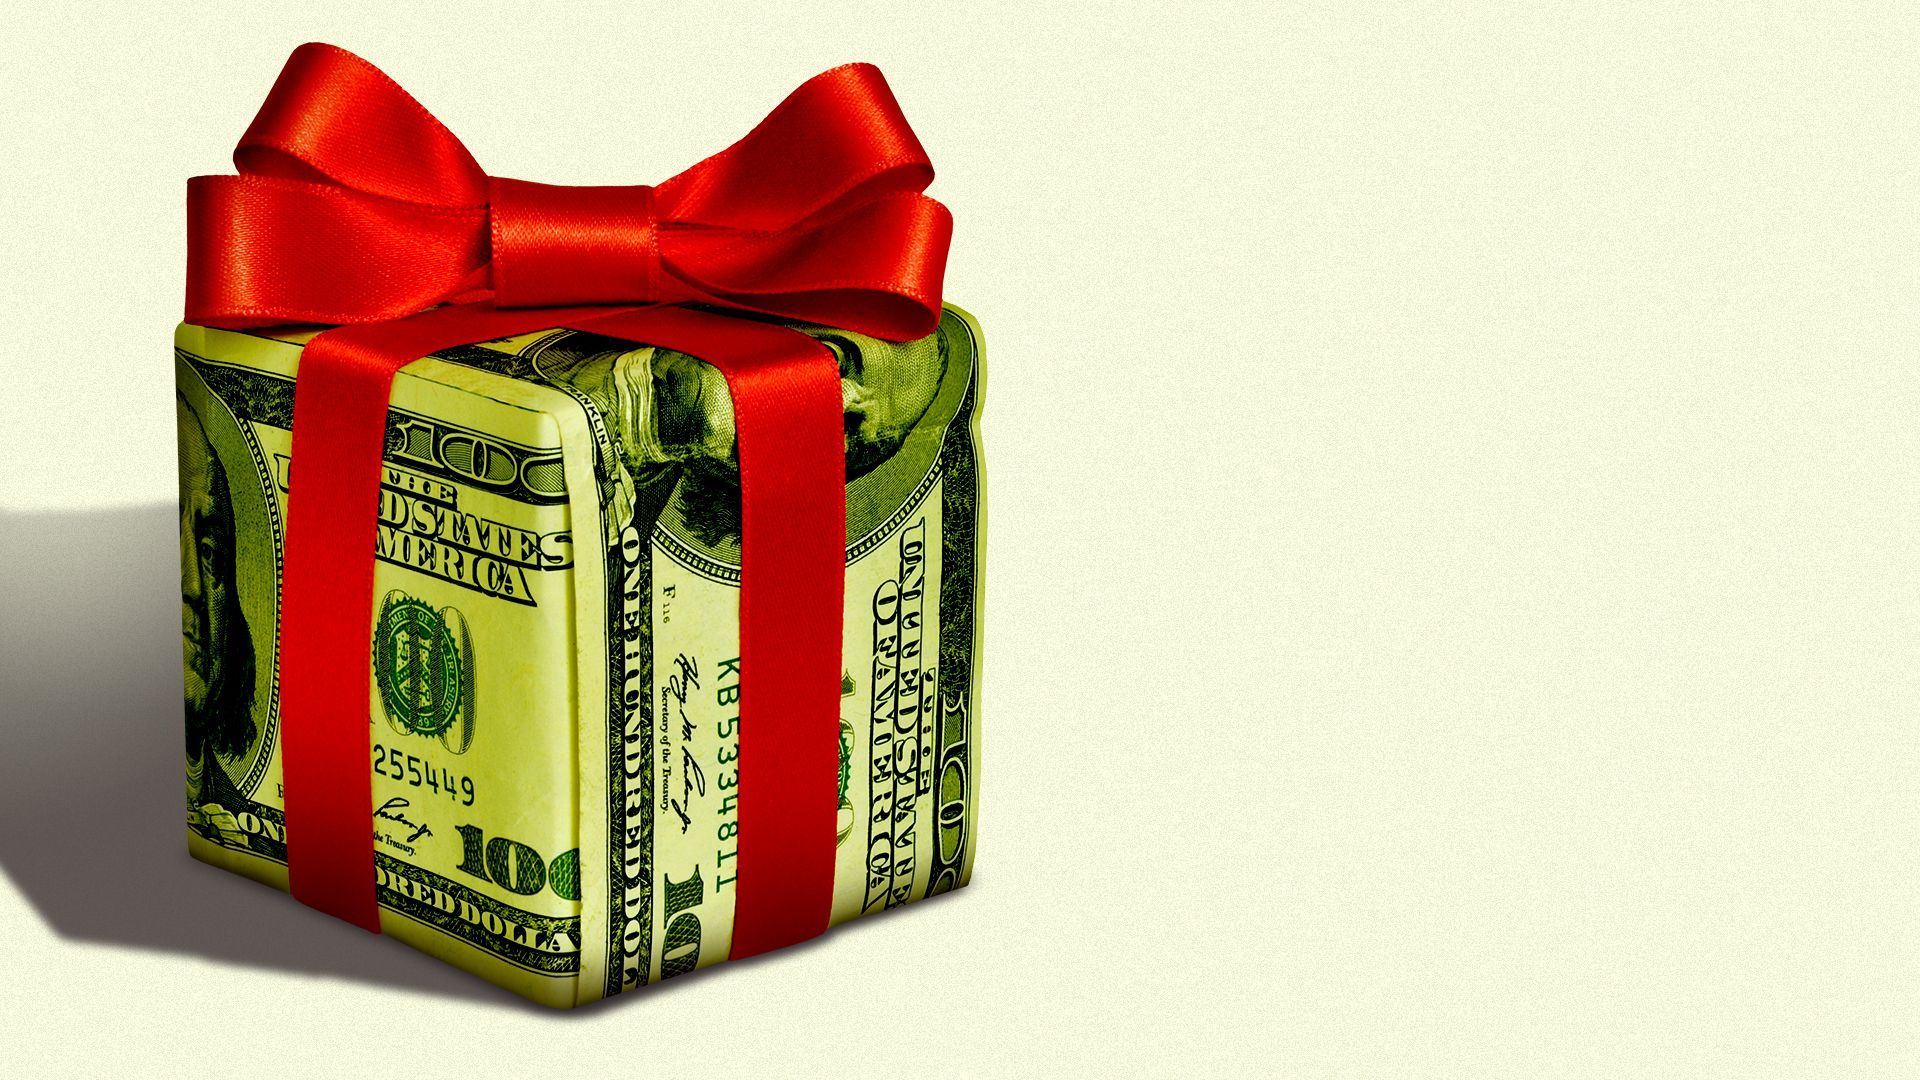 Illustration of a gift wrapped in hundred dollar bills